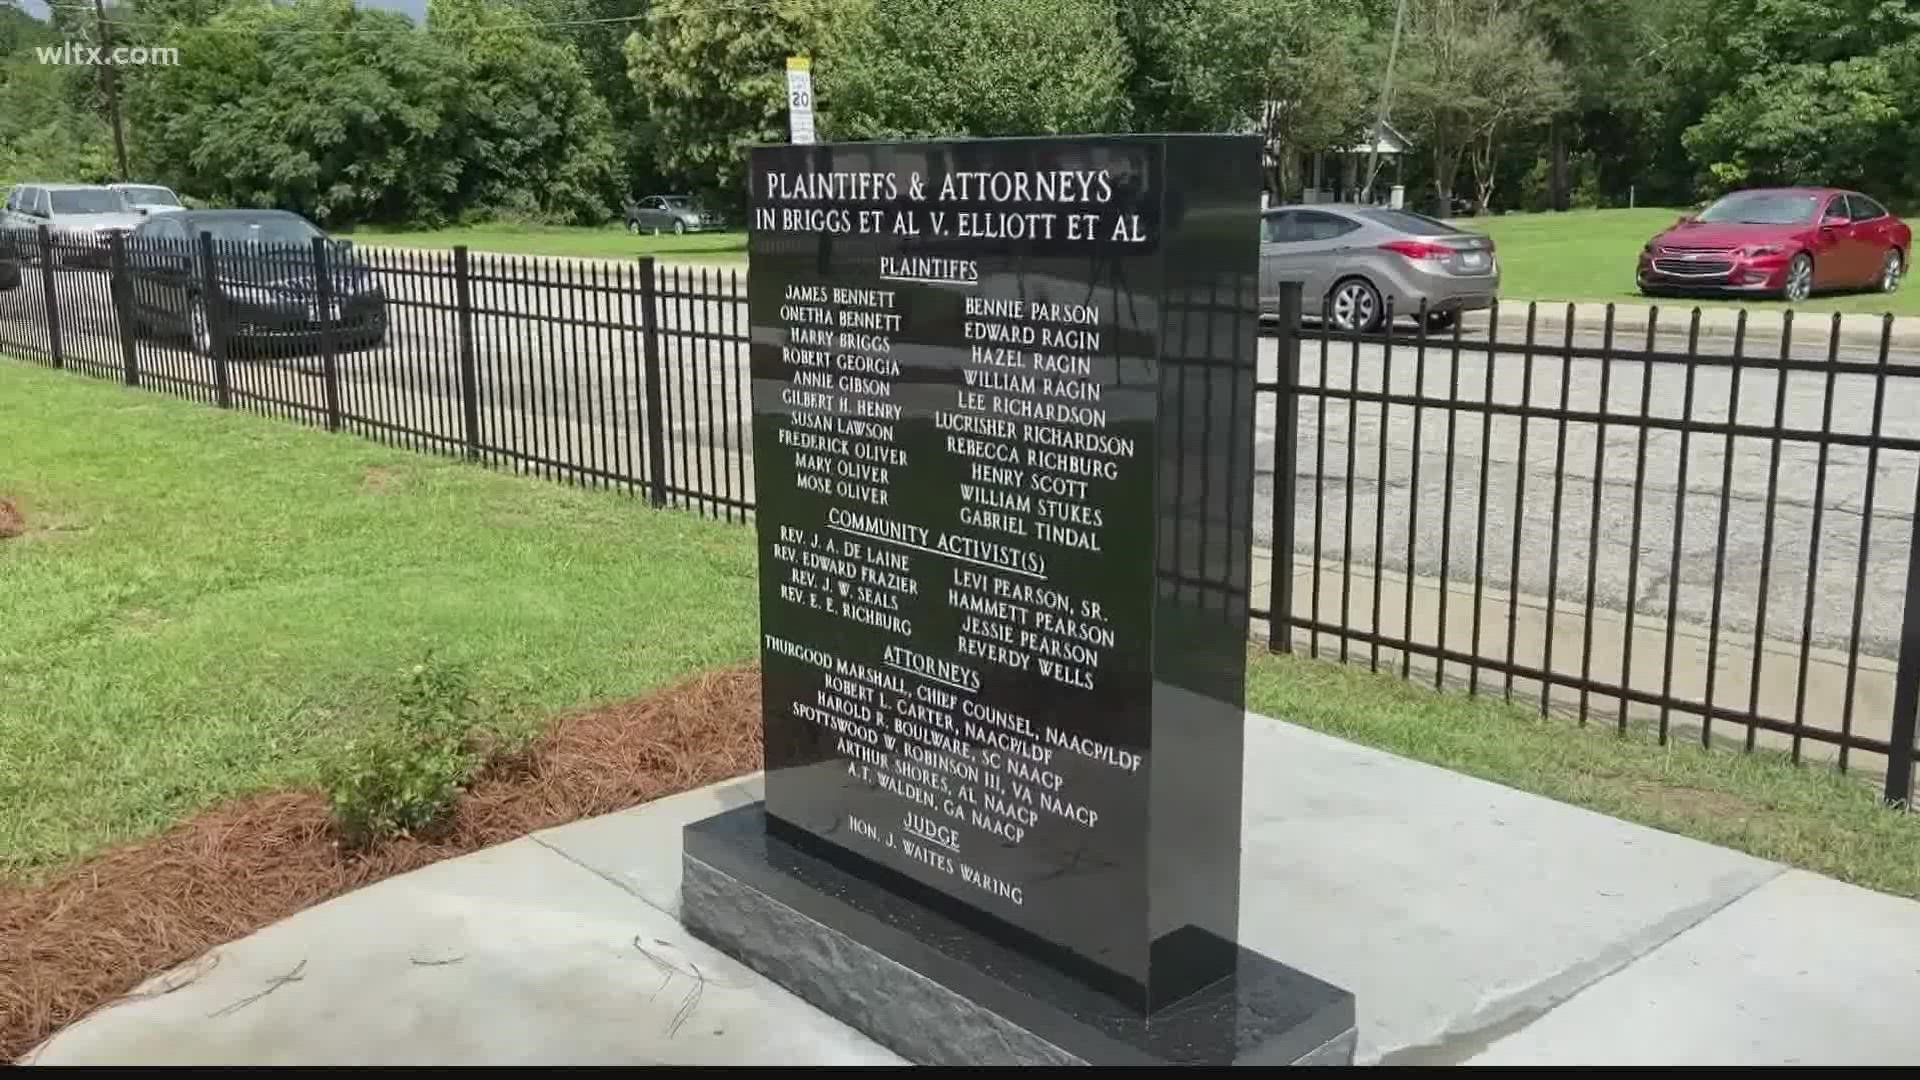 In Summerton, South Carolina, a monument to remember the historic Briggs v. Elliott desegregation case was placed at the old Scott's Branch School.